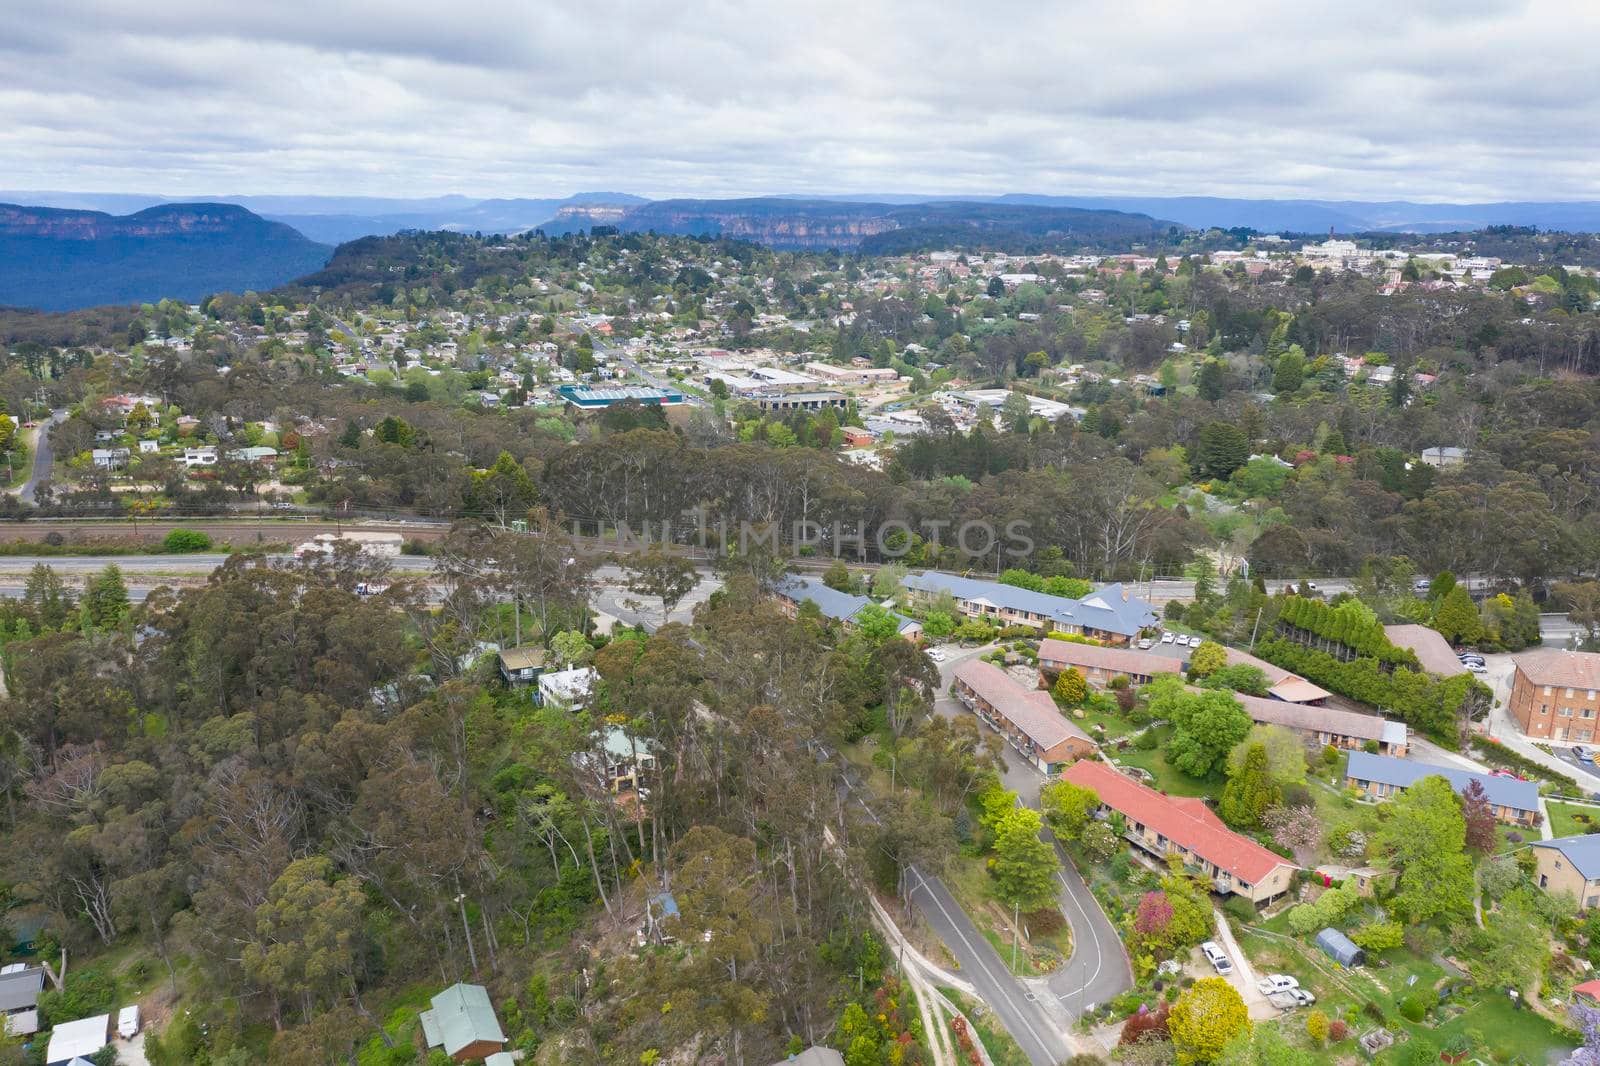 Aerial view of the township of Leura in regional New South Wales in Australia by WittkePhotos